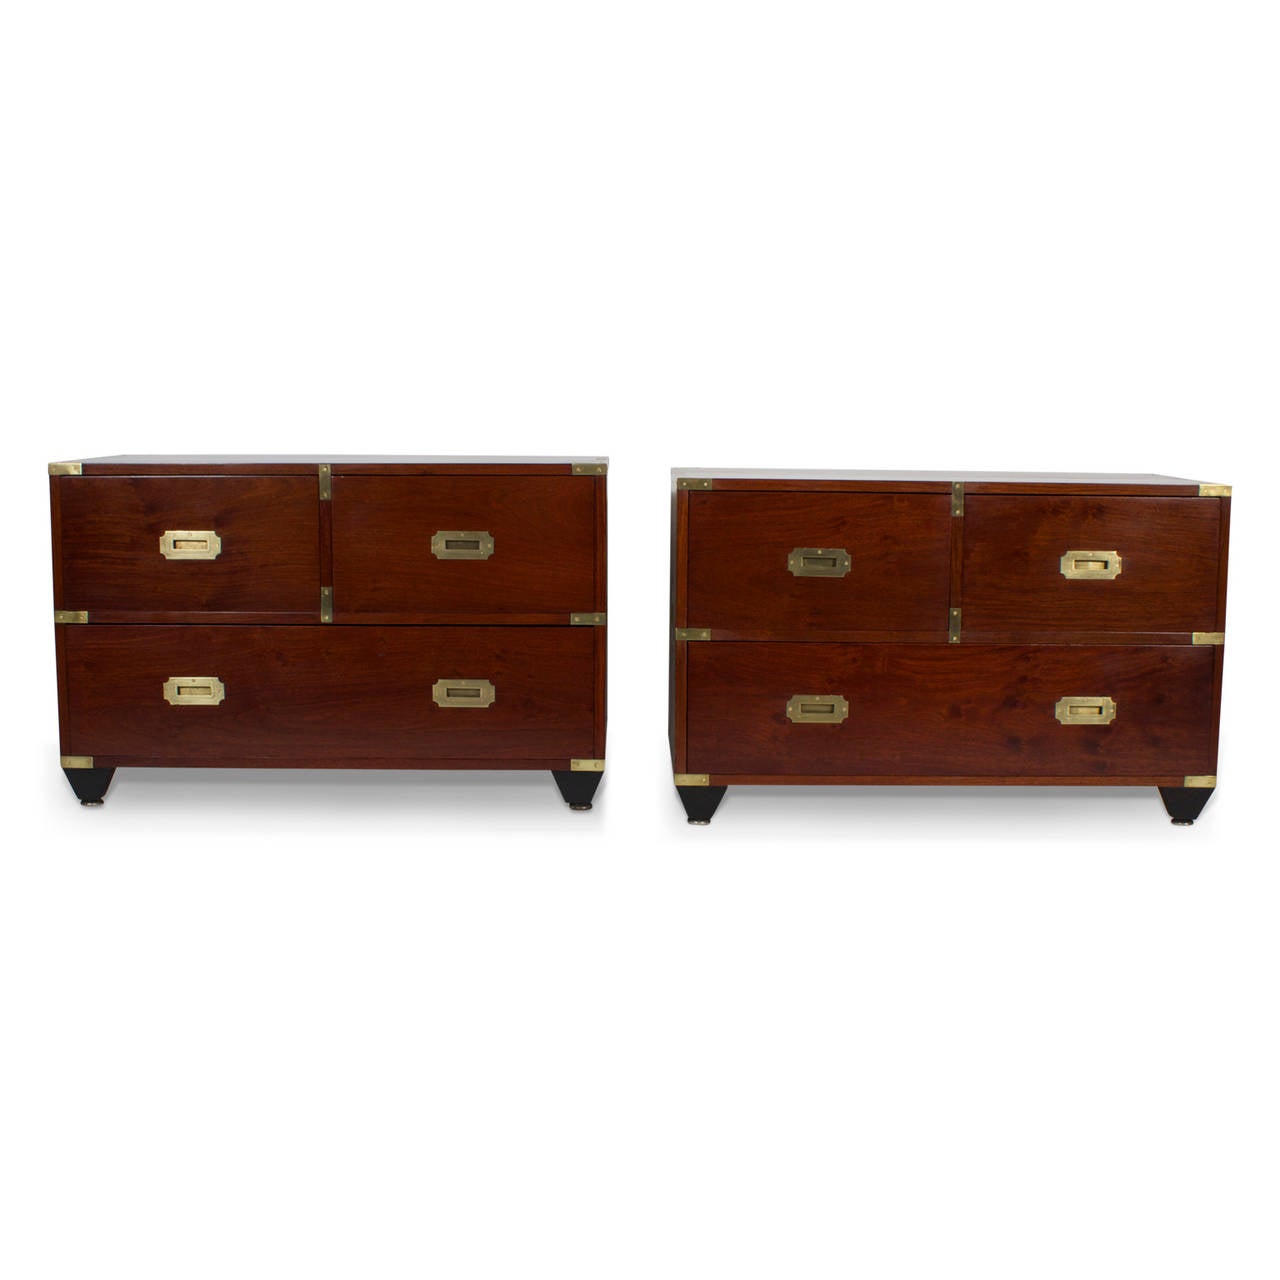 A fine pair of Horstmann campaign style night stands, made in a rich mahogany, with dovetailed cases and classic brass campaign style hardware with ebonized tapered feet. High quality construction with a modern scale. Brass label Charlotte